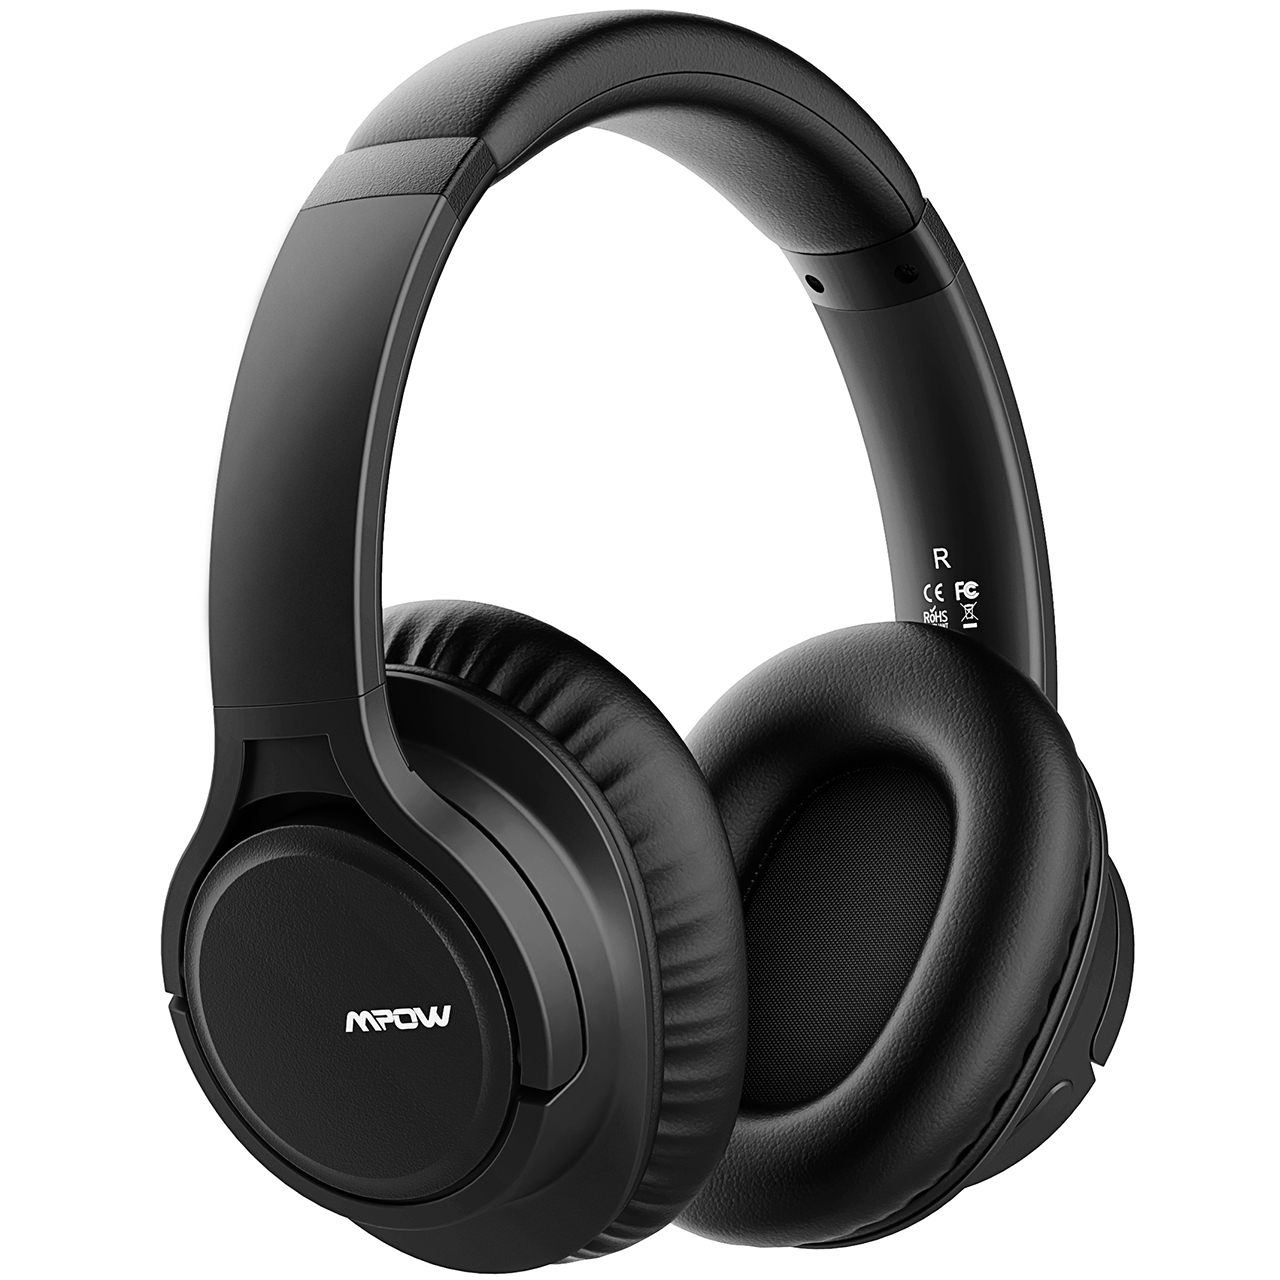 MPOW H7 Pro Over-ear Bluetooth 5.0 Headphones, Wireless Headphones Supports Rapid Charge, Bluetooth Headsets, Hi-Fi Stereo Sounds Black - image 1 of 9